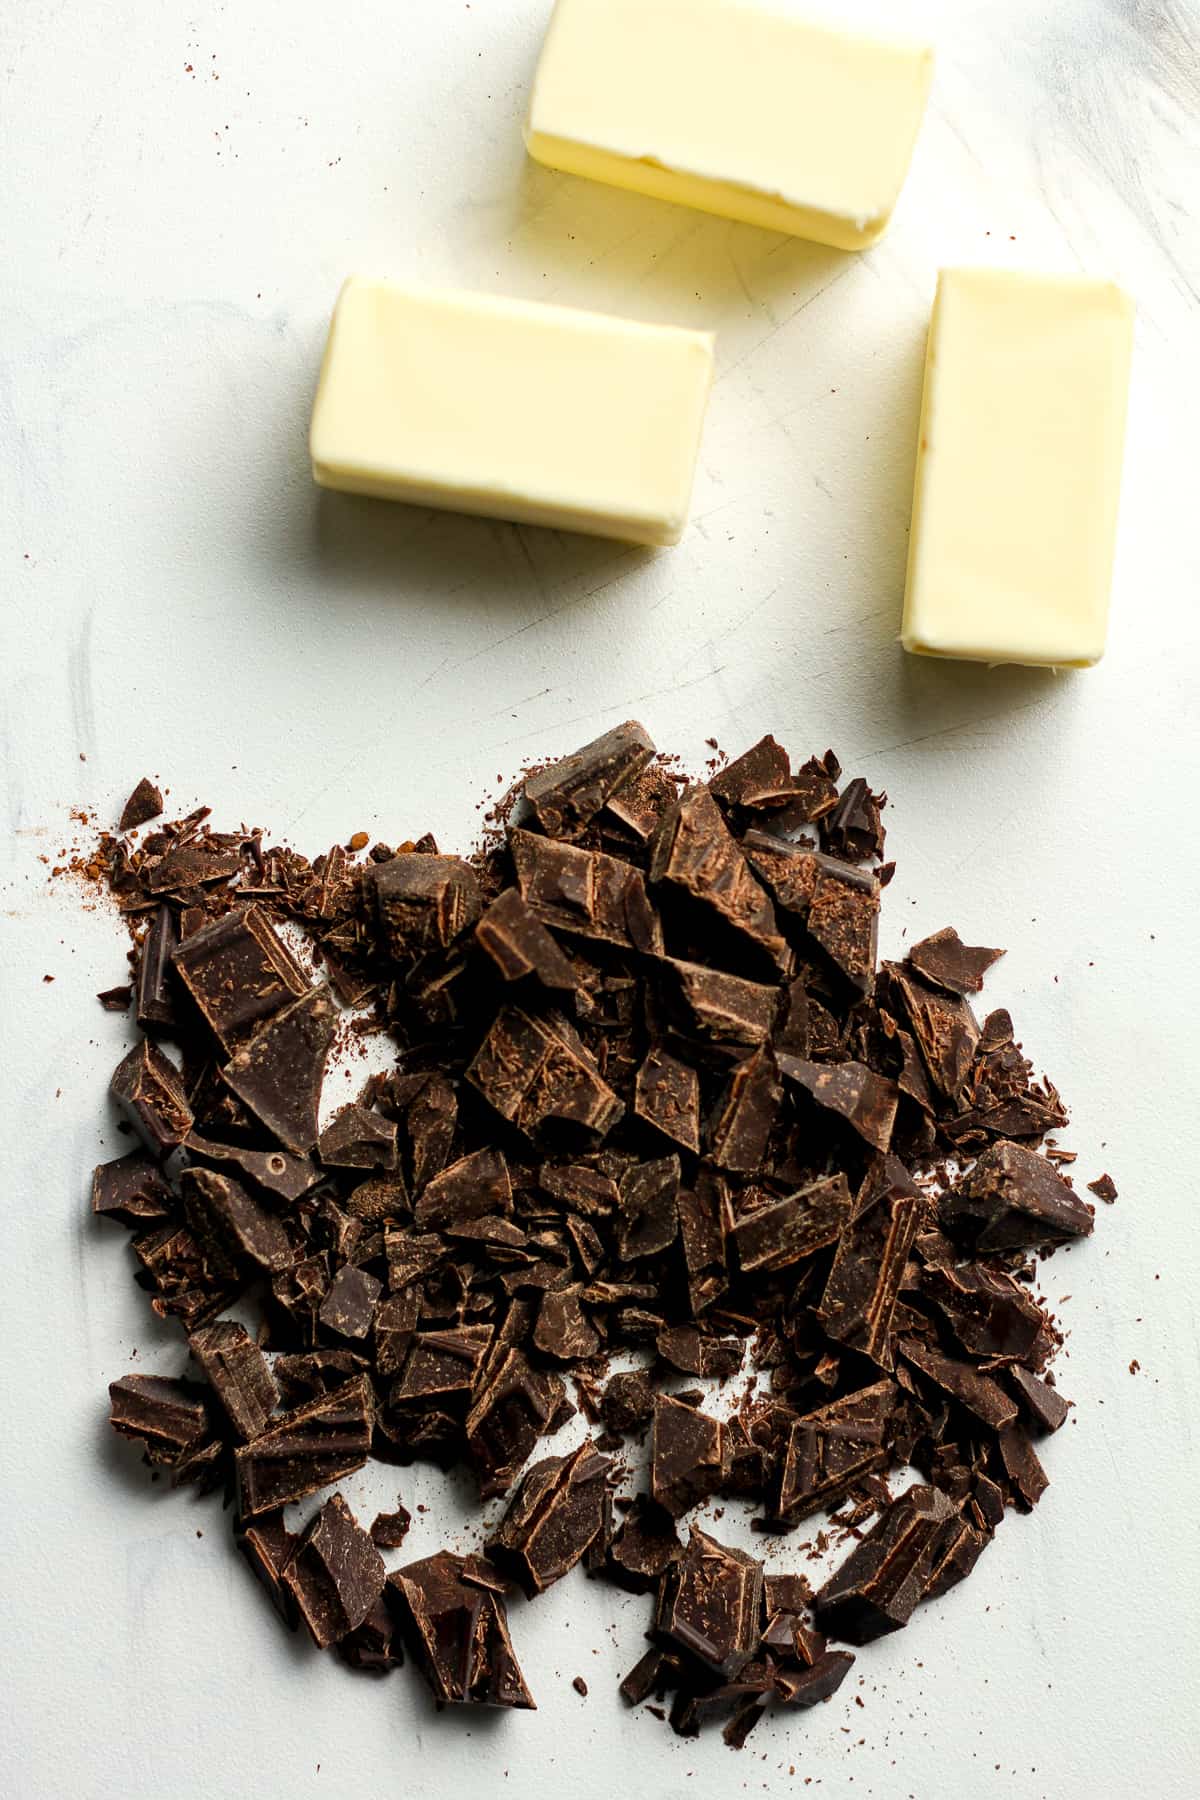 Butter and chopped chocolate bar on a board.